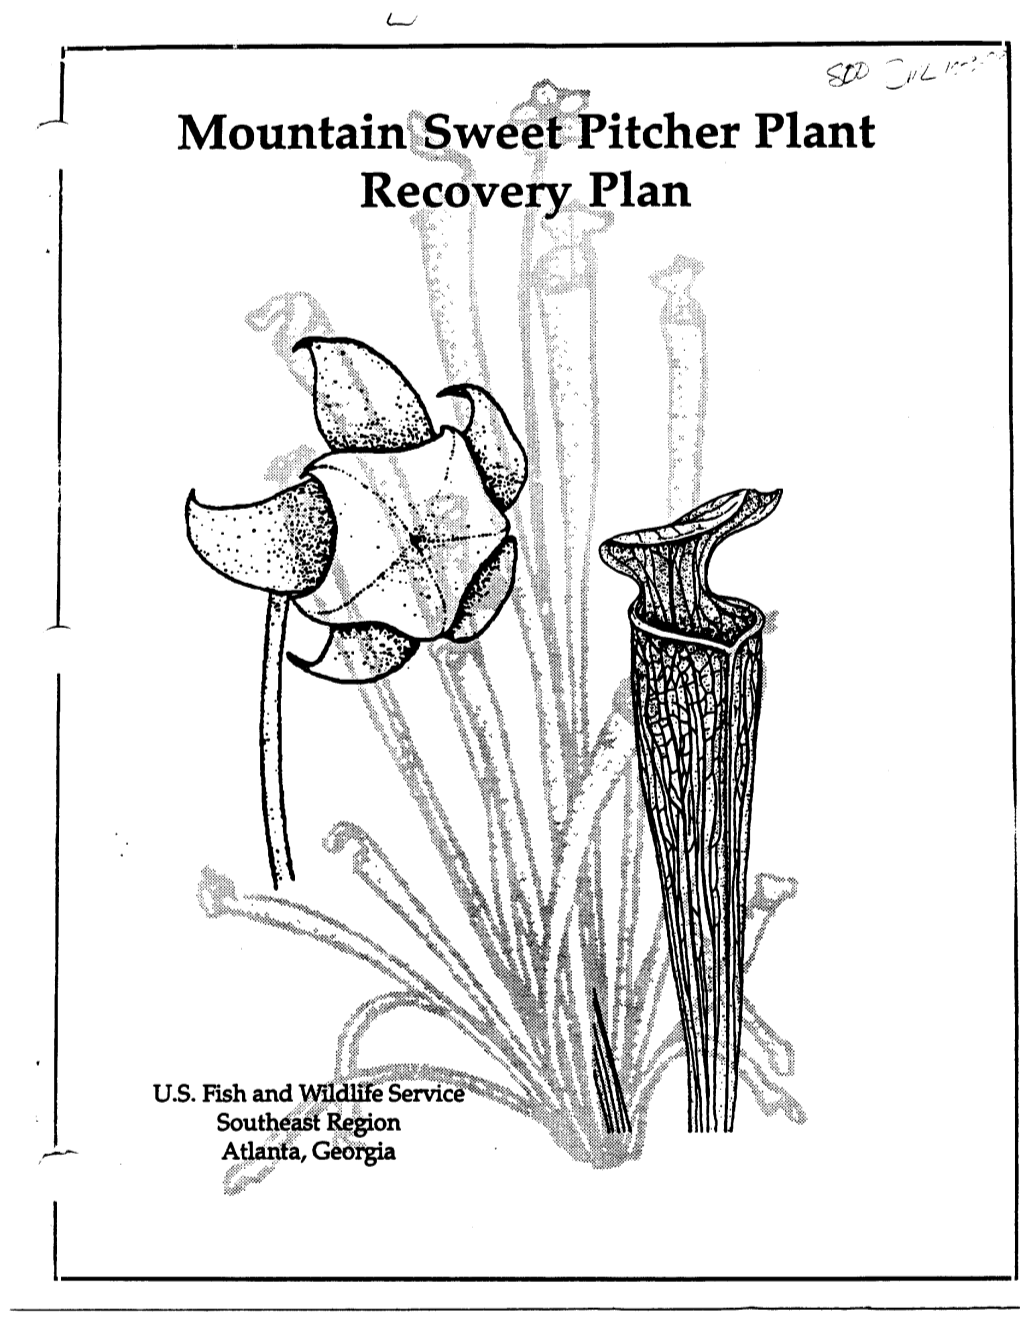 Weet Pitcher Plant Erv Plan RECOVERY PLAN